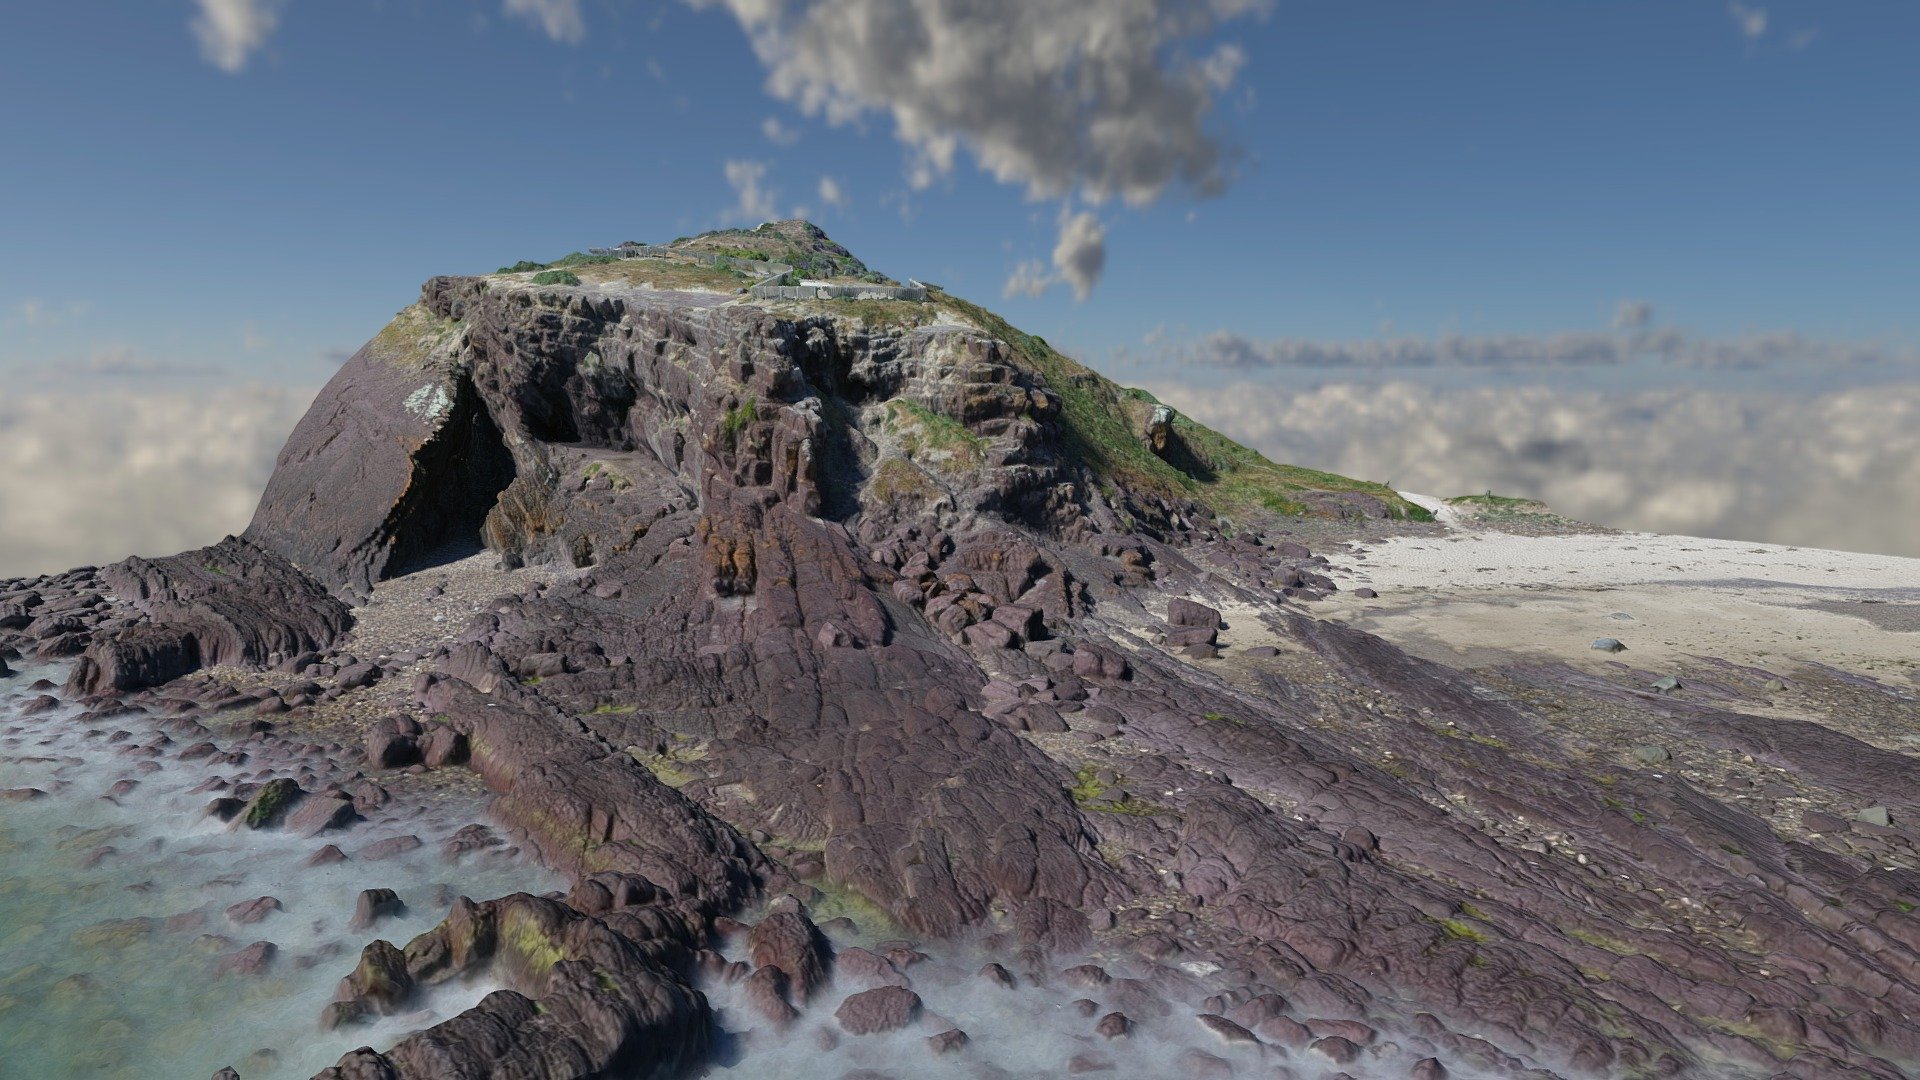 Spectacularly exposed plunging folds at Black Cliff, Hallett Cove Conservation Park, South Australia - Hallett Cove - Black Cliff folds - 3D model by Geoscience@UniSA - Project LIVE (@ProjectLIVE) 3d model